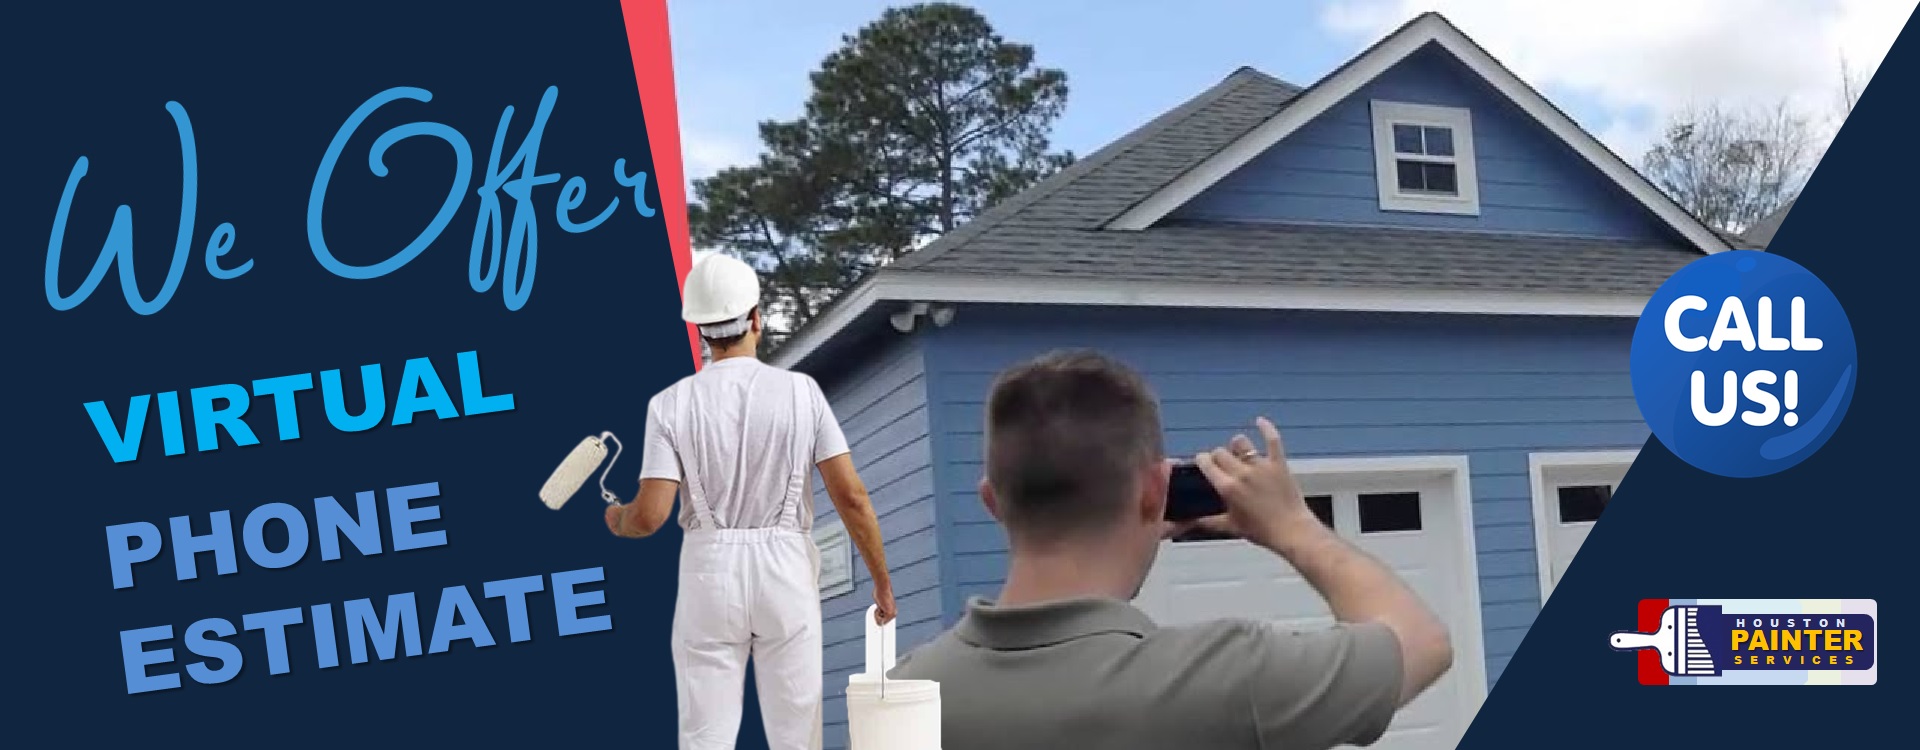 Houston Painters Residential and Commercial Painting Virtual Call Free Estimate